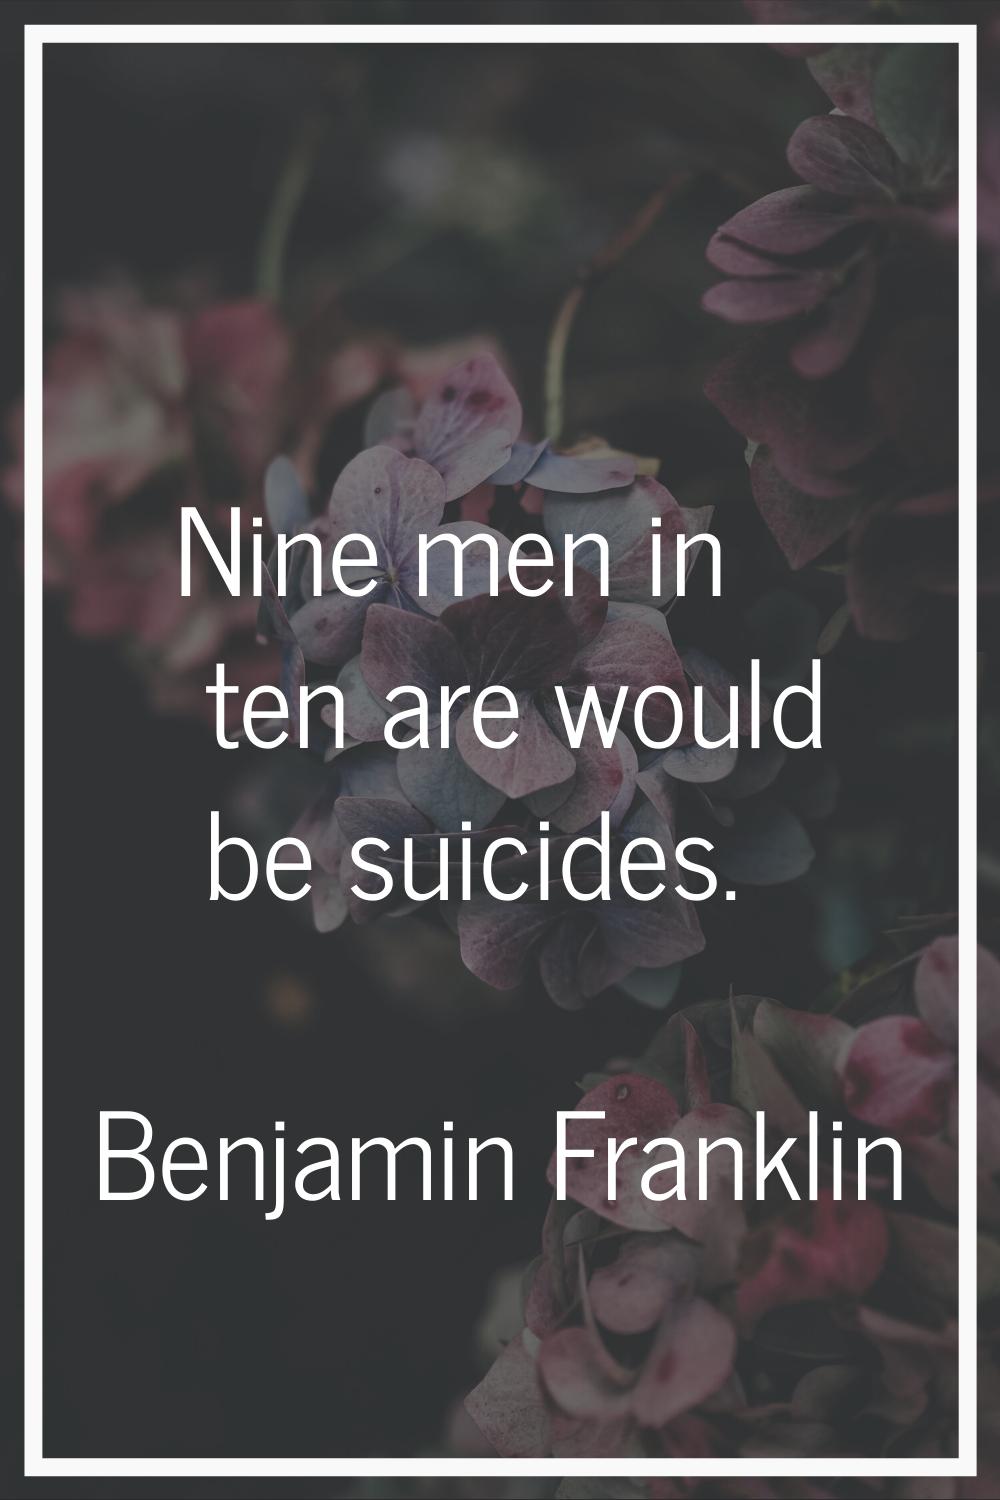 Nine men in ten are would be suicides.